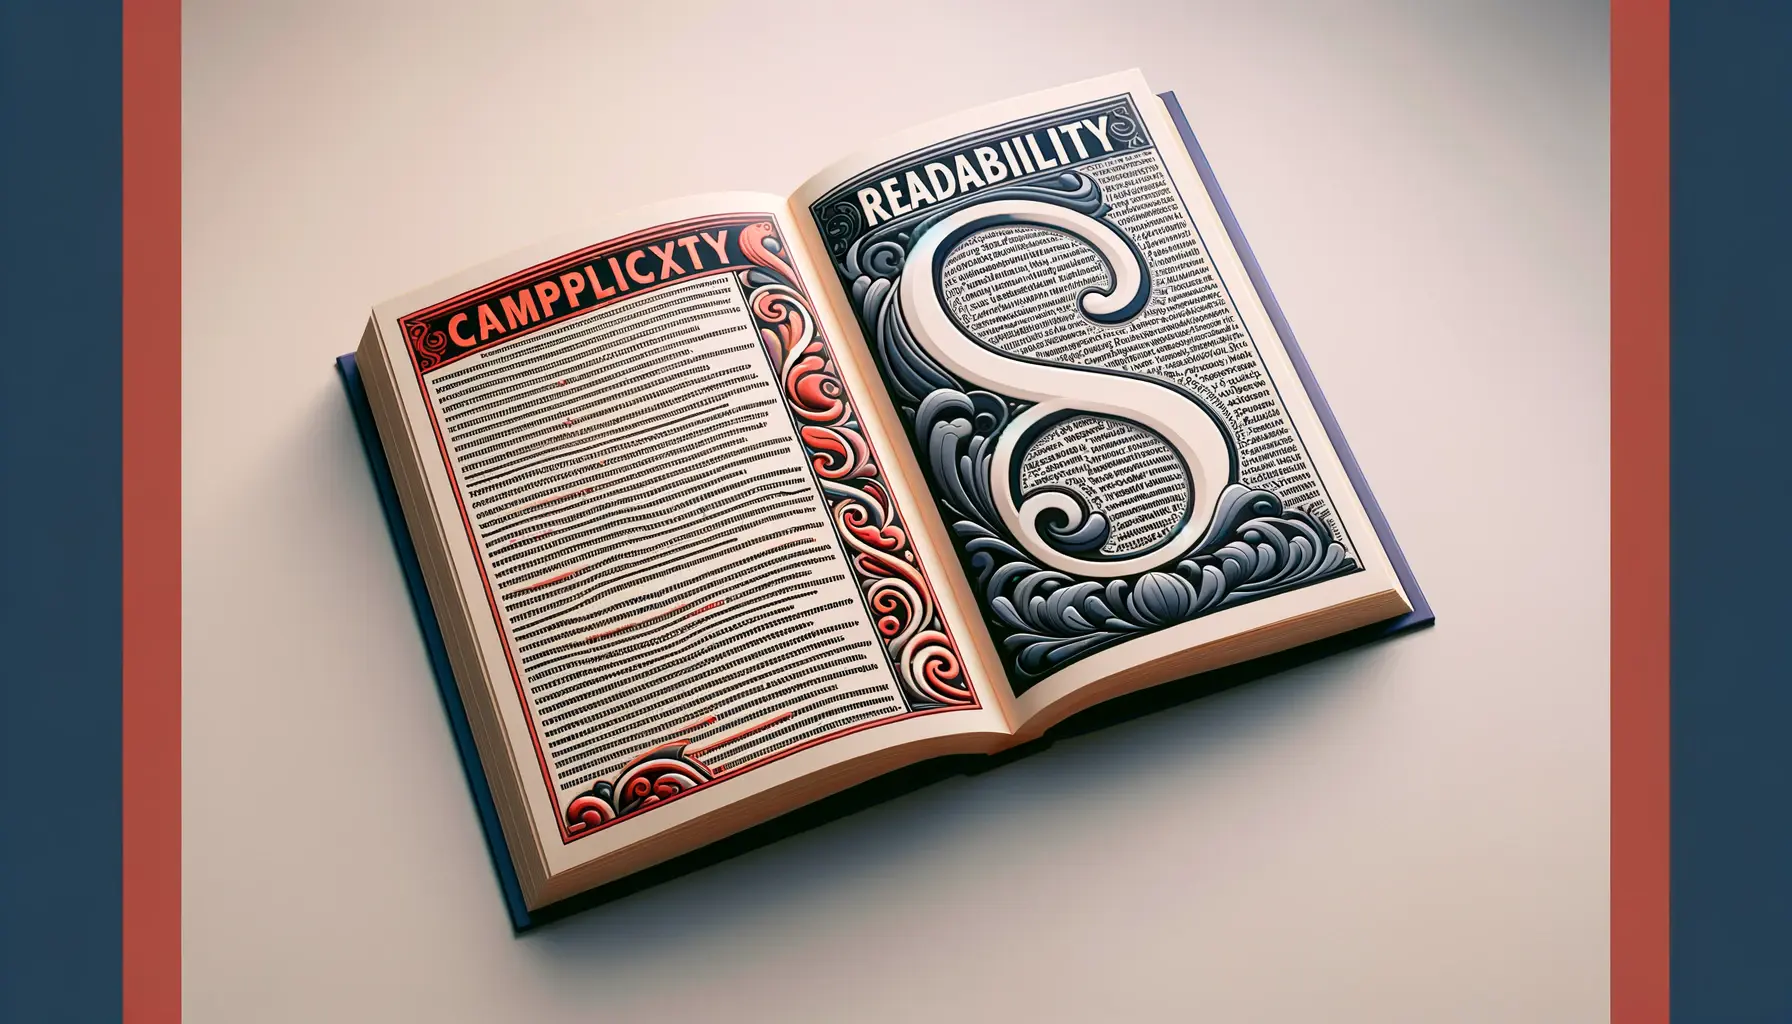 618Media: #1 Digital Marketing Agency: Balance Complexity and Readability in Typography